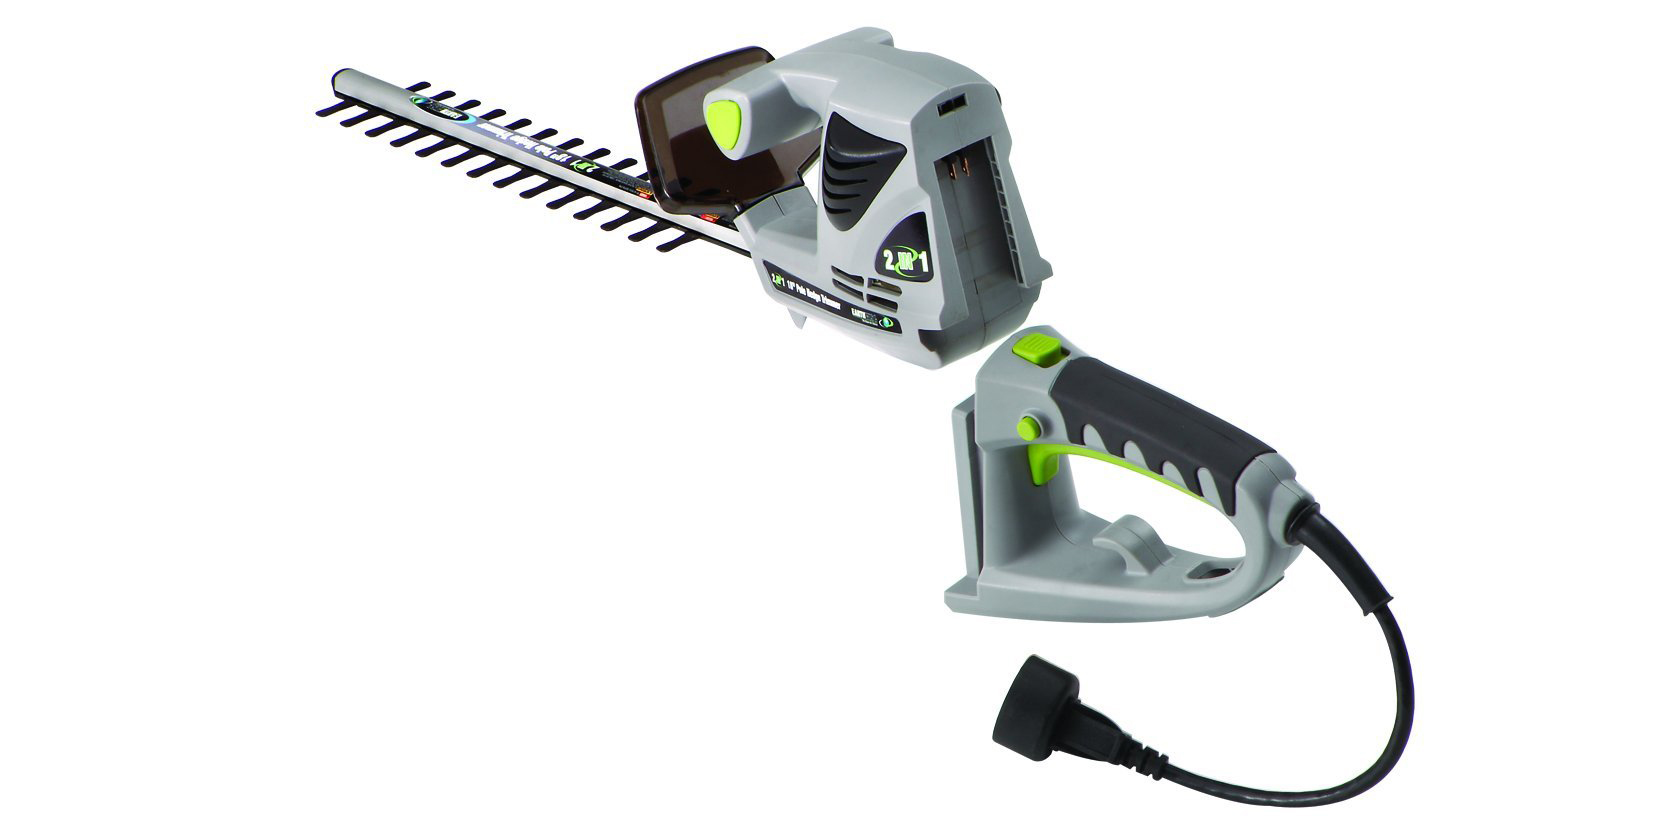 earthwise hd pht 10118 pole hedge trimmer